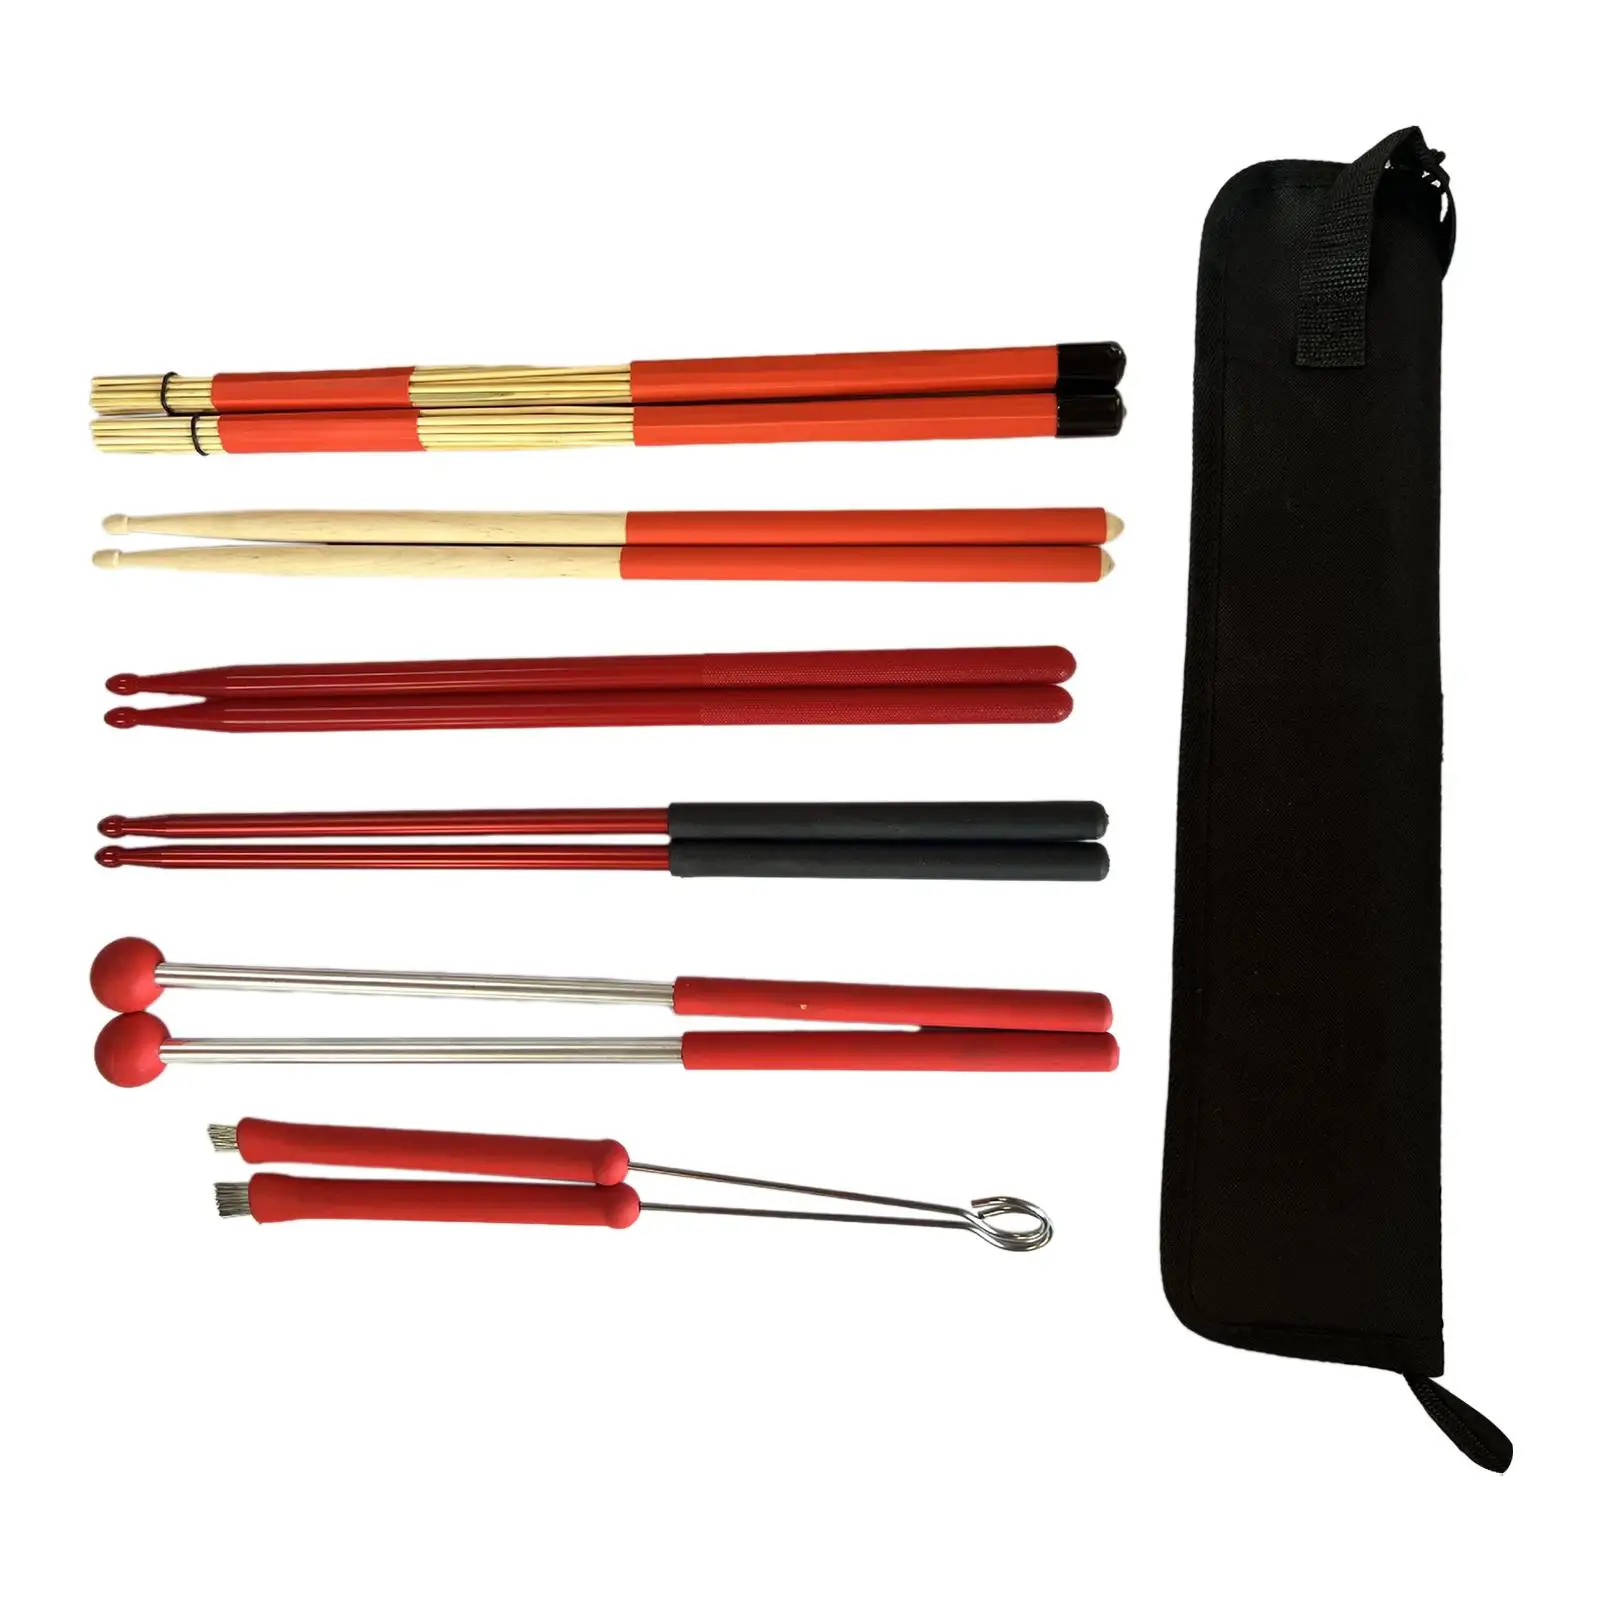 Drumsticks Set Wood Drum Sticks with Portable Storage Bag Retractable Drum Wire Brushes for Beginner Drummer Playing Practice